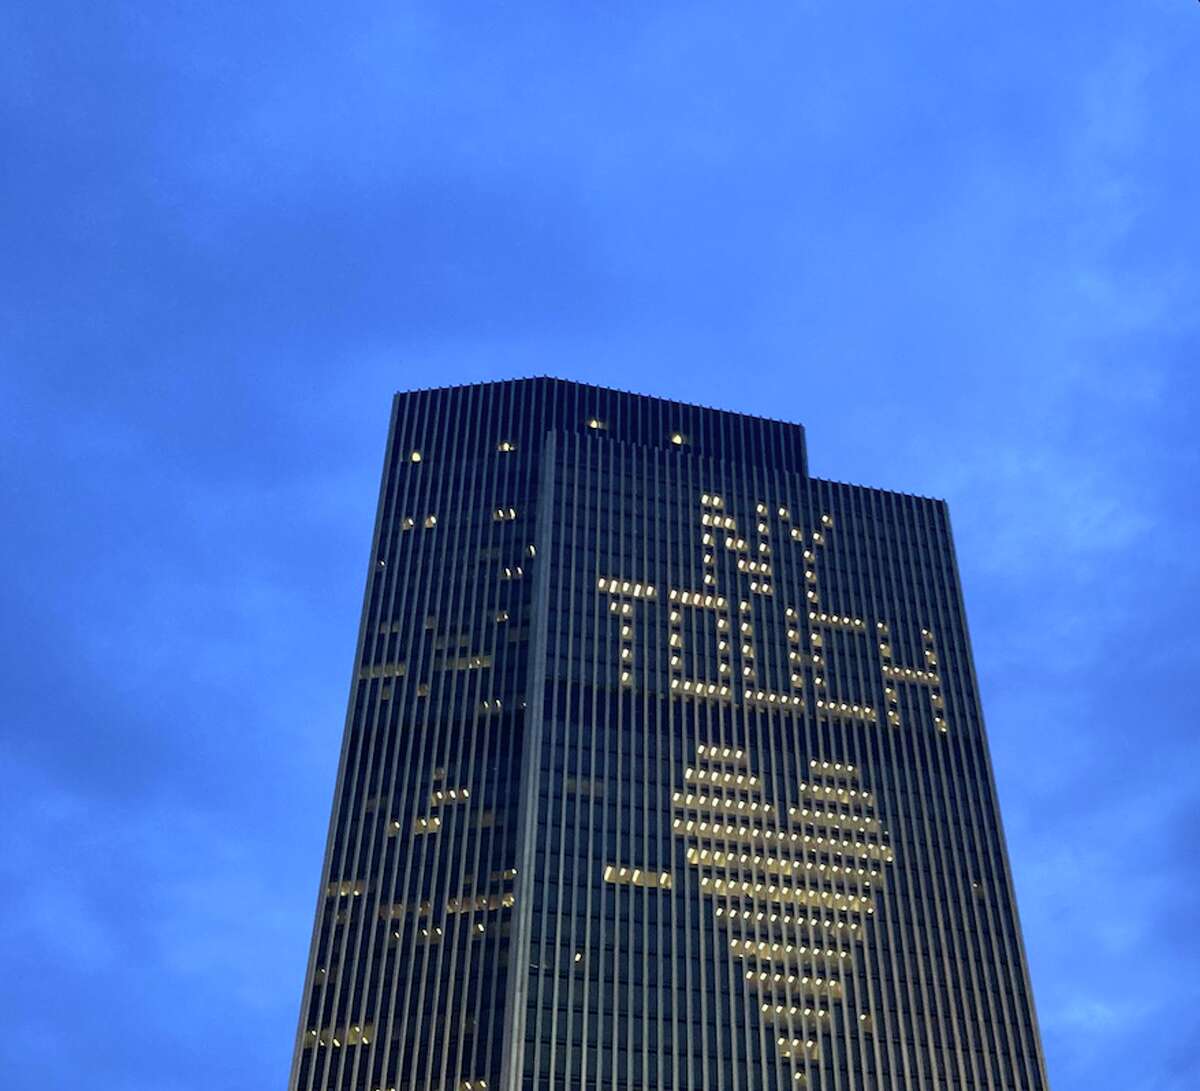 A light display on the Corning Tower that normally reads "NY TOUGH" instead read "NY TOUCH" on Friday night.